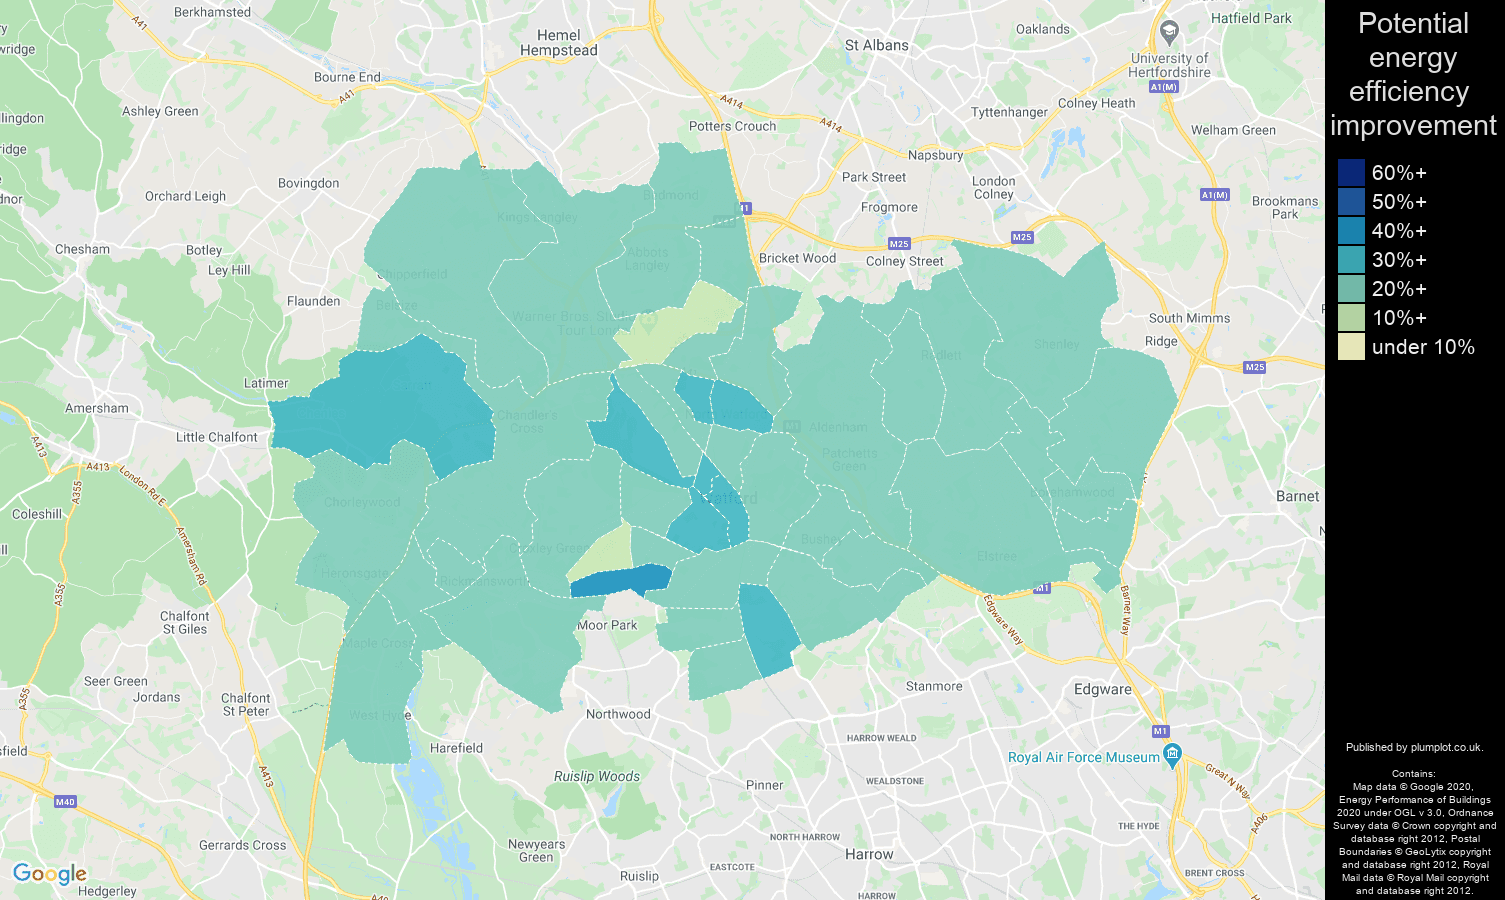 Watford map of potential energy efficiency improvement of houses